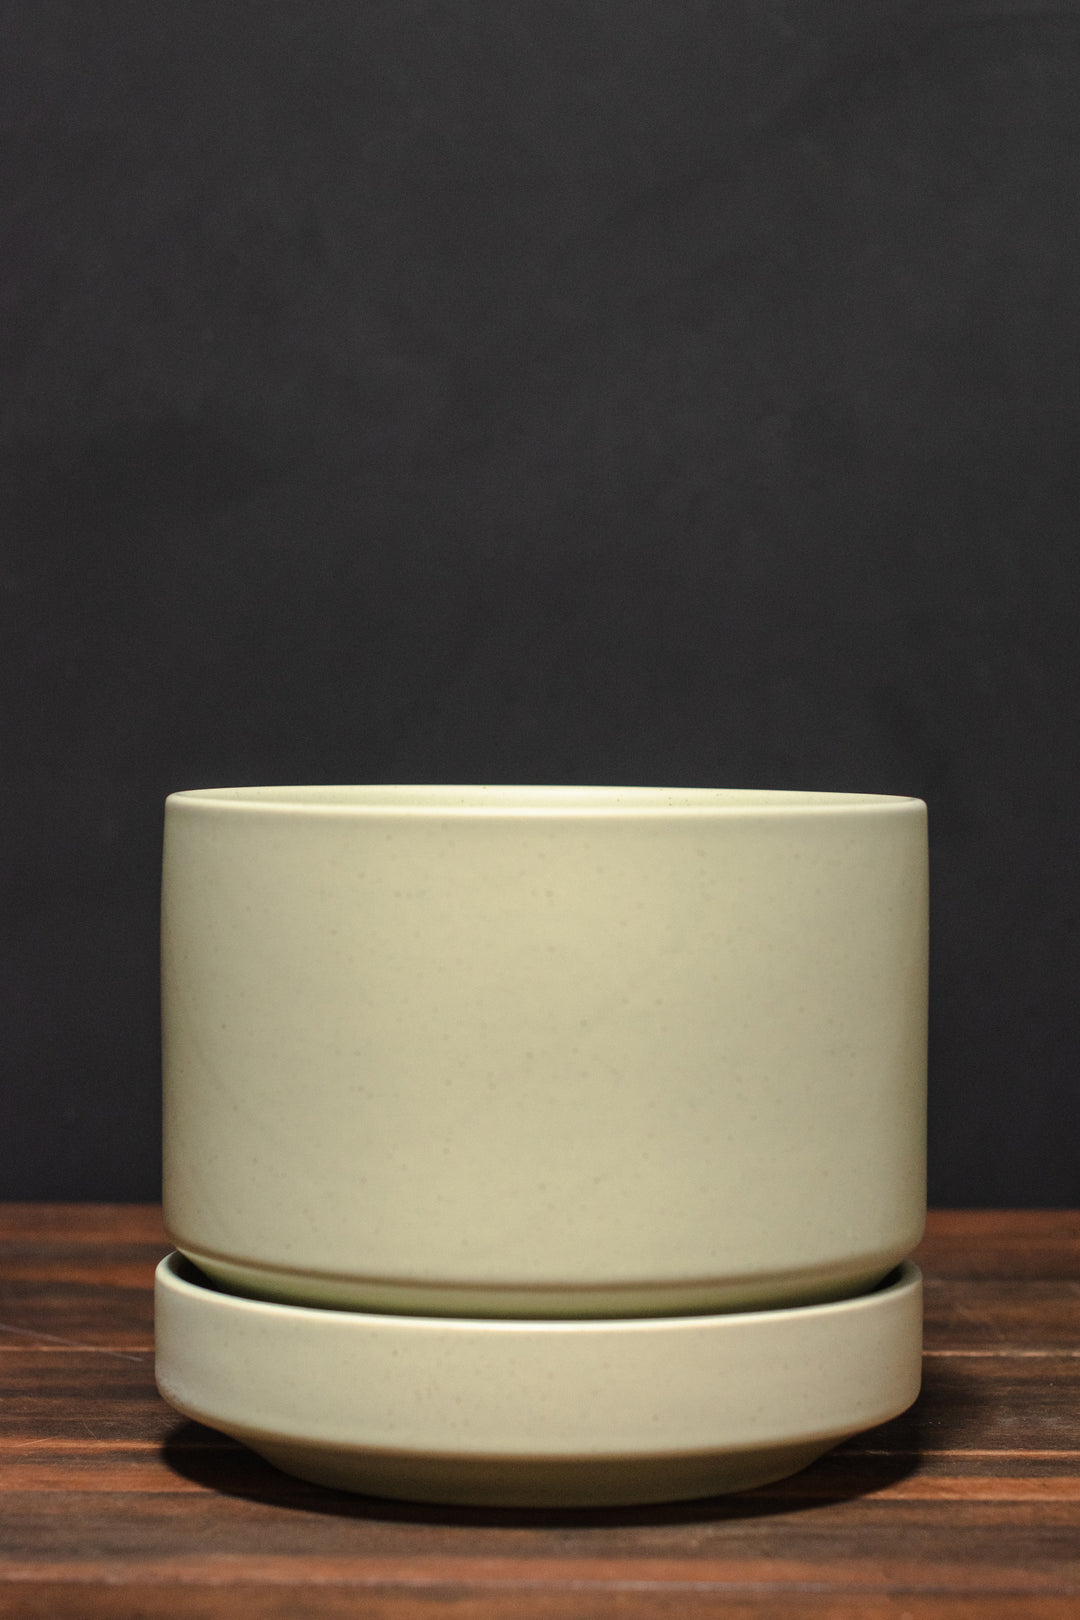 REVIVAL Ceramics "Round Two" Planter by LBE Design